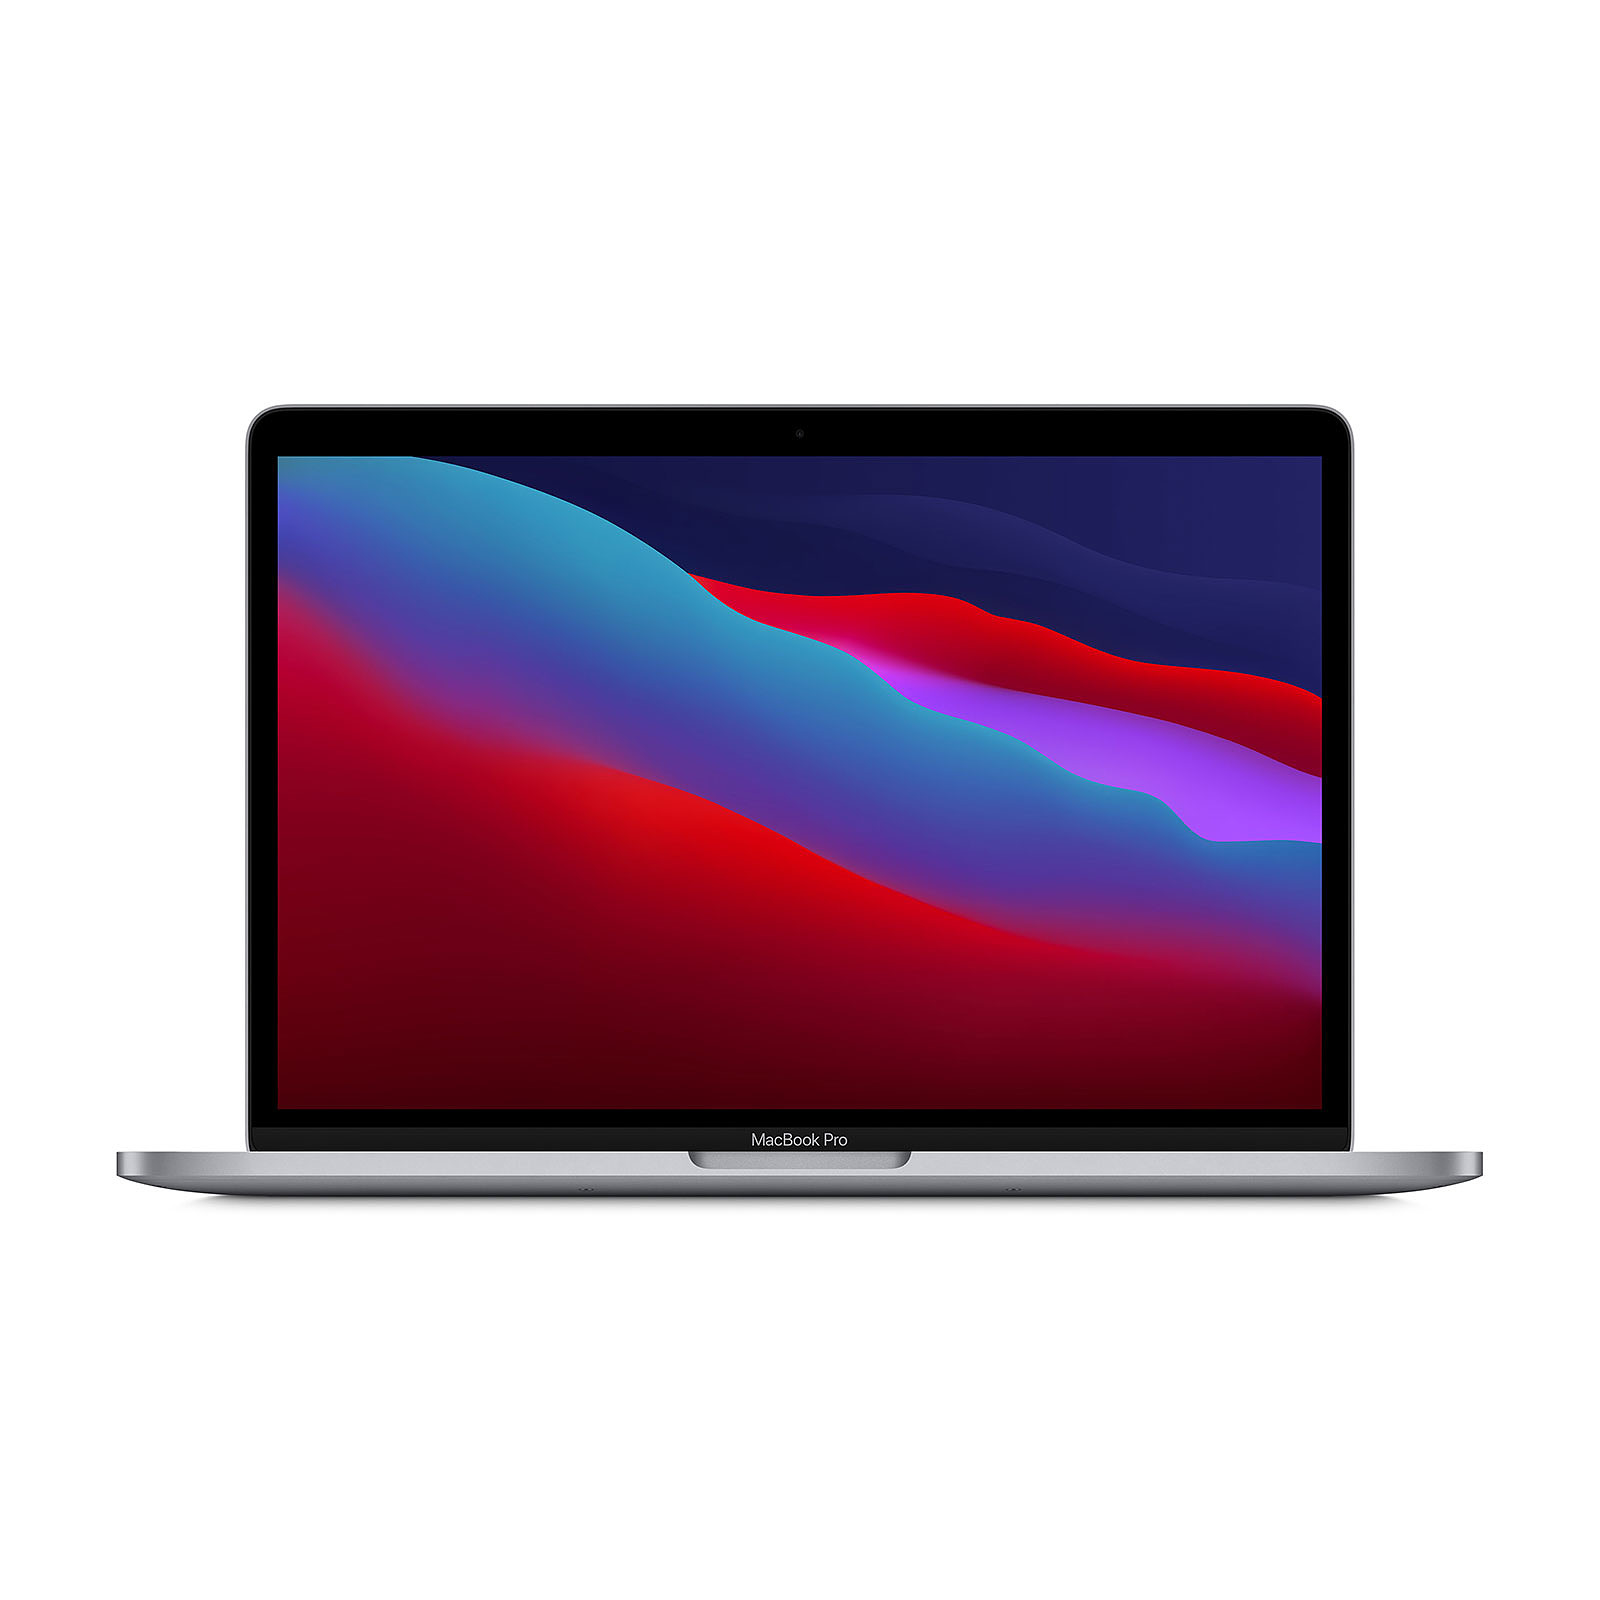 Apple MacBook Pro M1 (2020) 13.3" Gris sideral 16Go/1 To (MYD92FN/A-16GB-1TB) - MacBook Apple